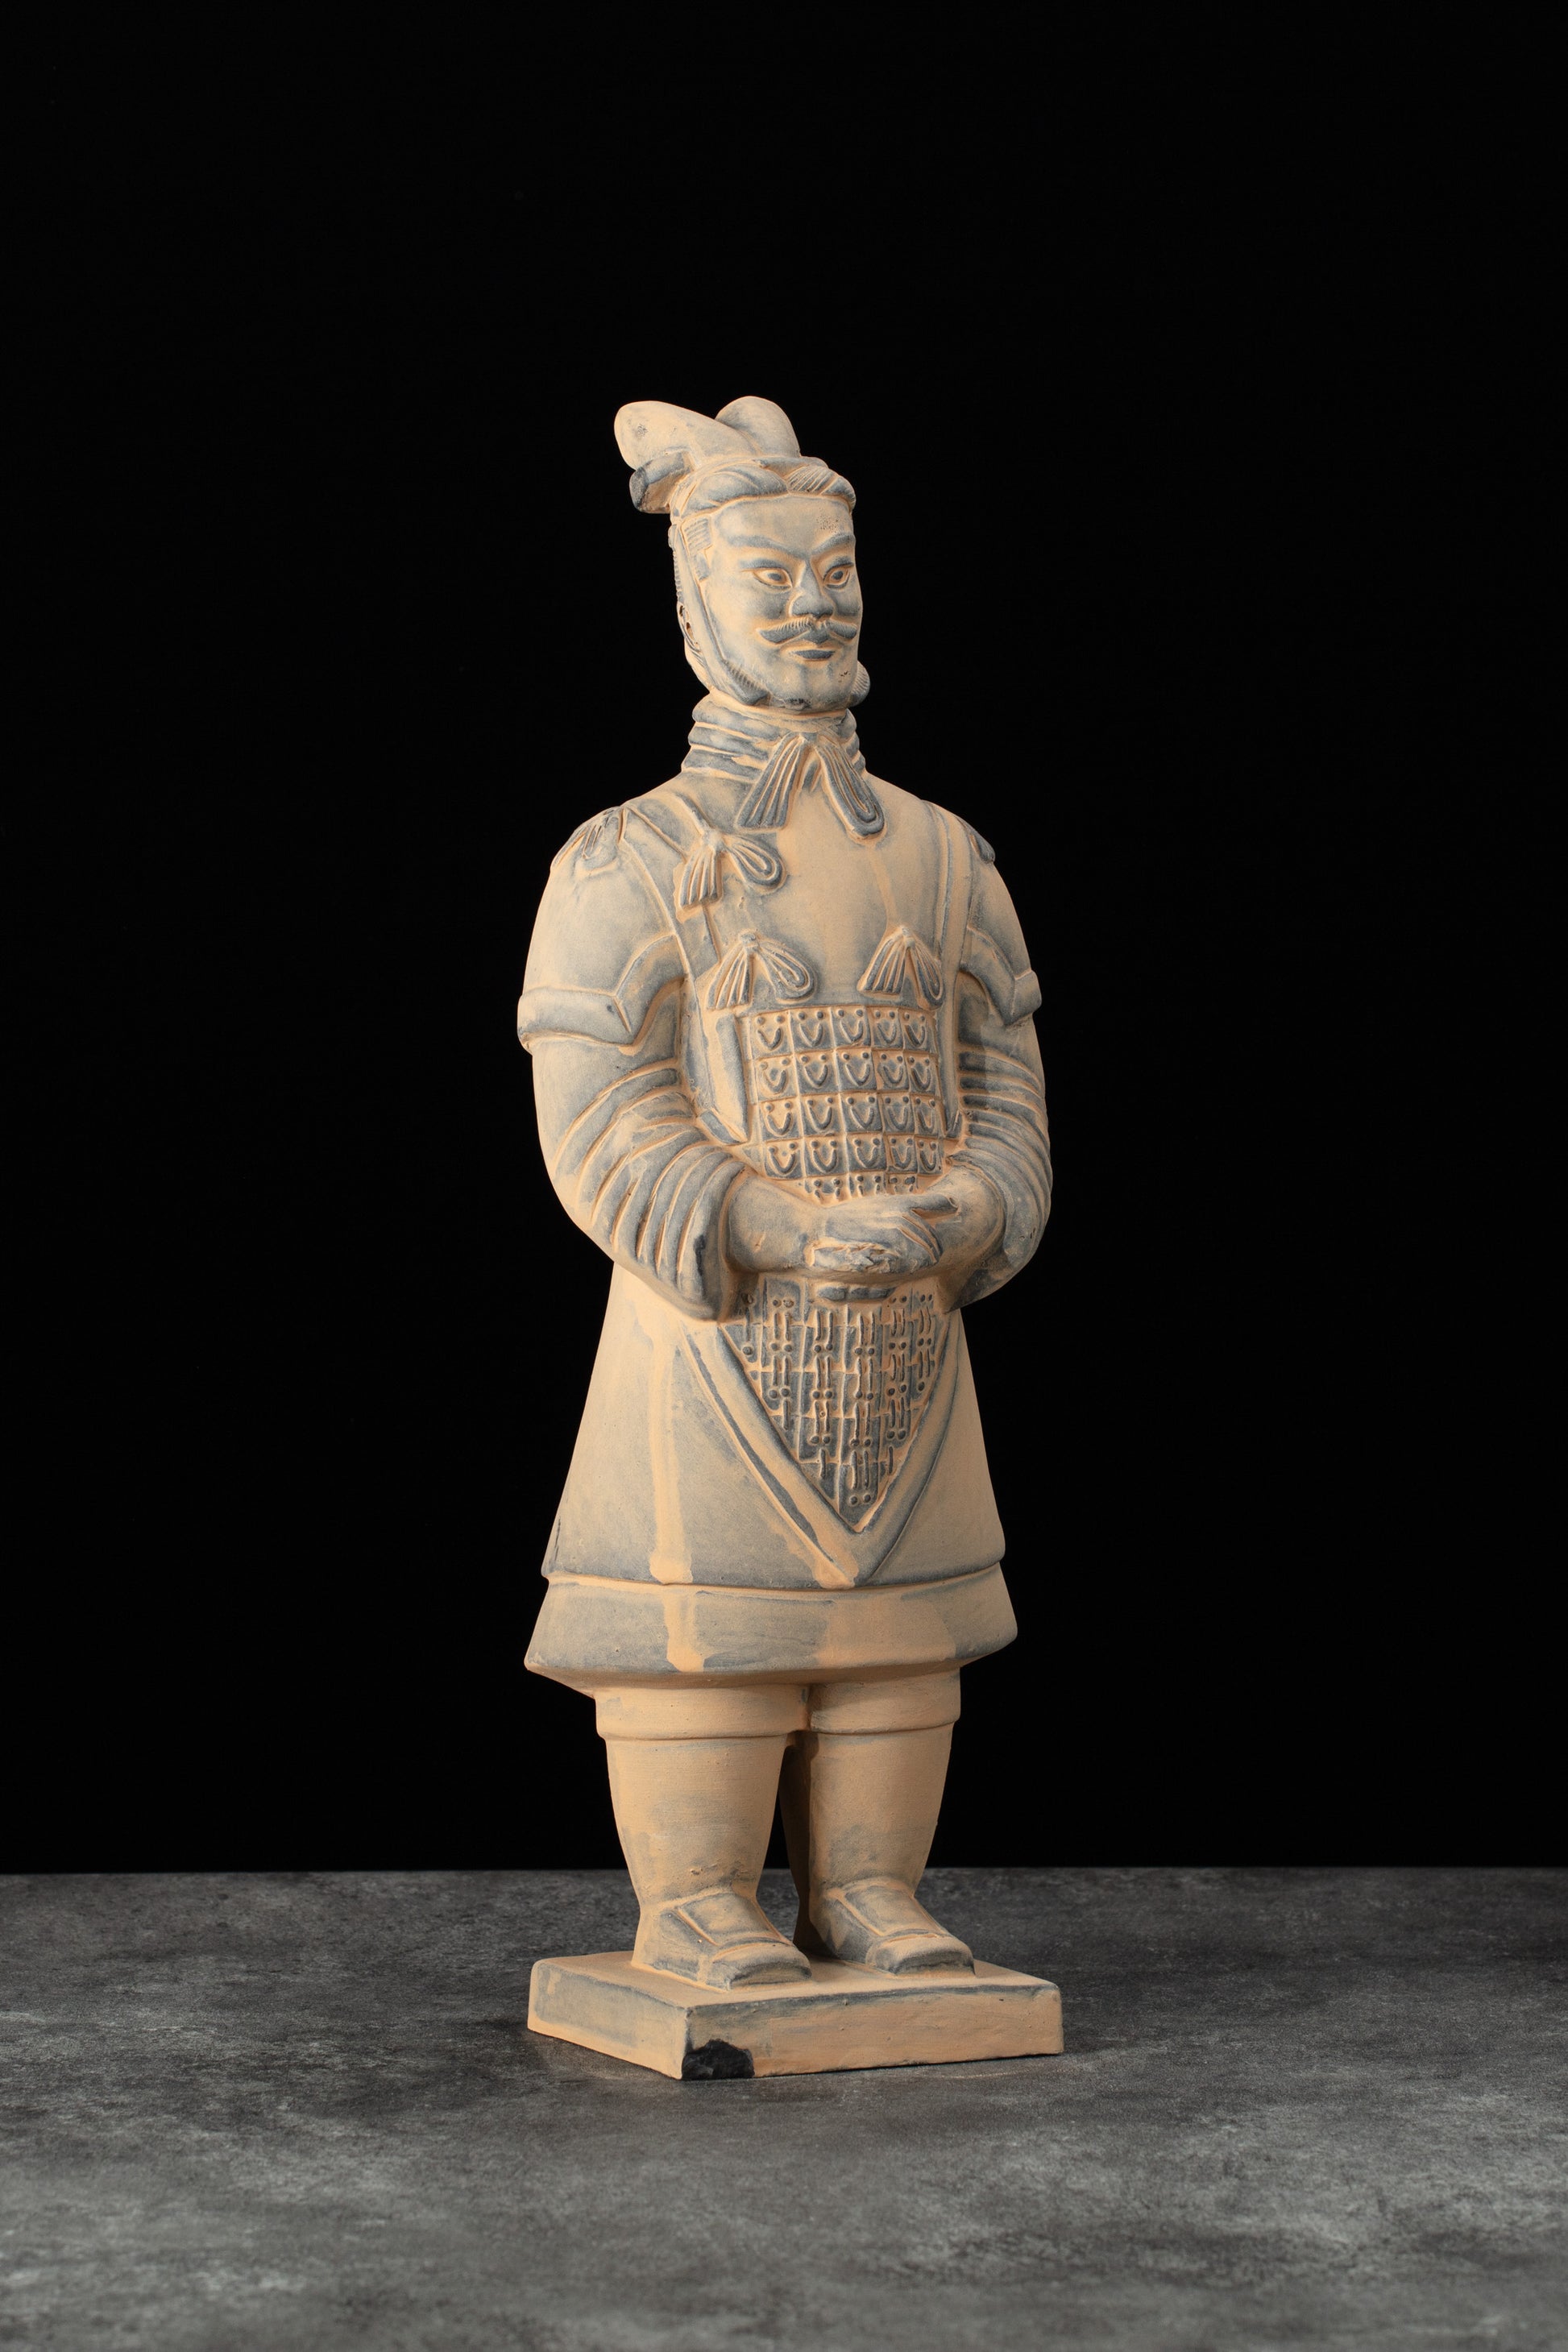 35CM General - CLAYARMY-Culturally Precise: Side view of the 35CM General, illustrating cultural precision in the sculpting of ancient military uniforms and accessories.